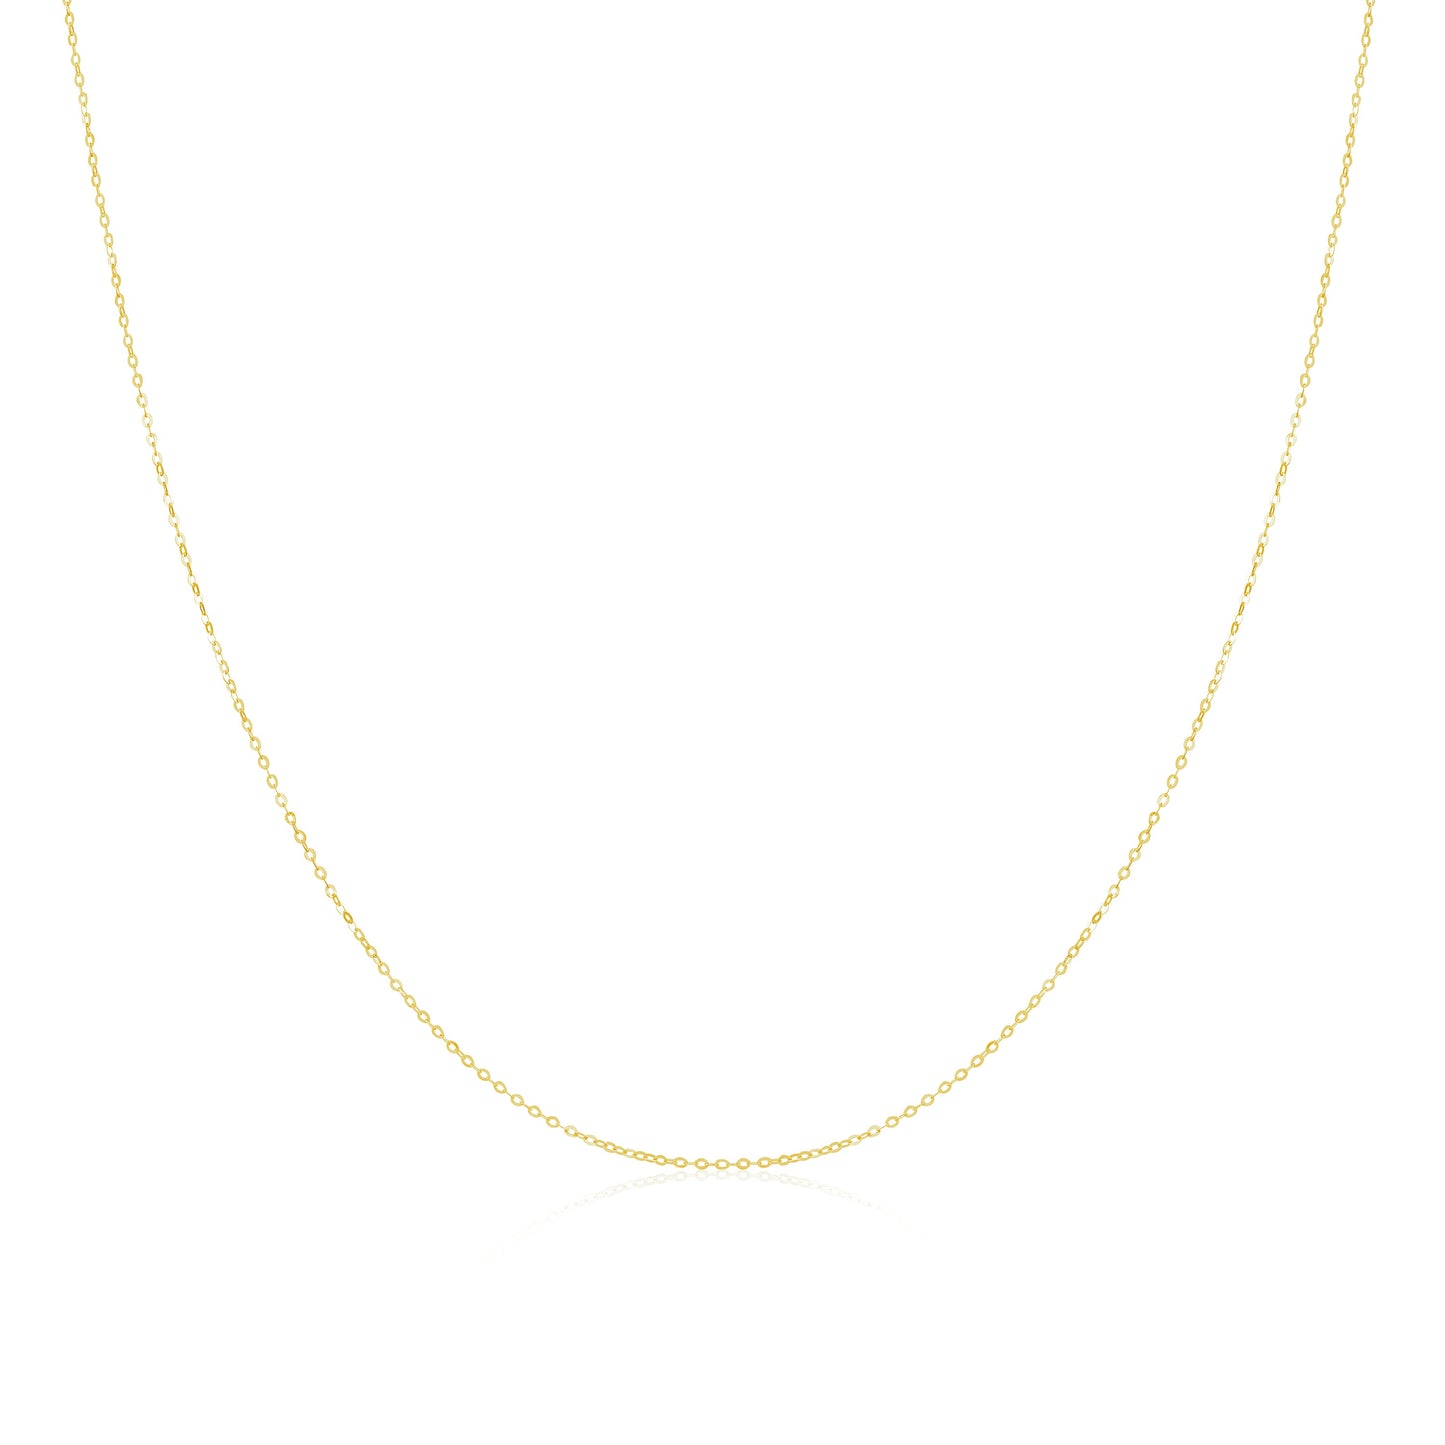 9ct Yellow Gold Hammered Trace Chain 16 - 24 Inches